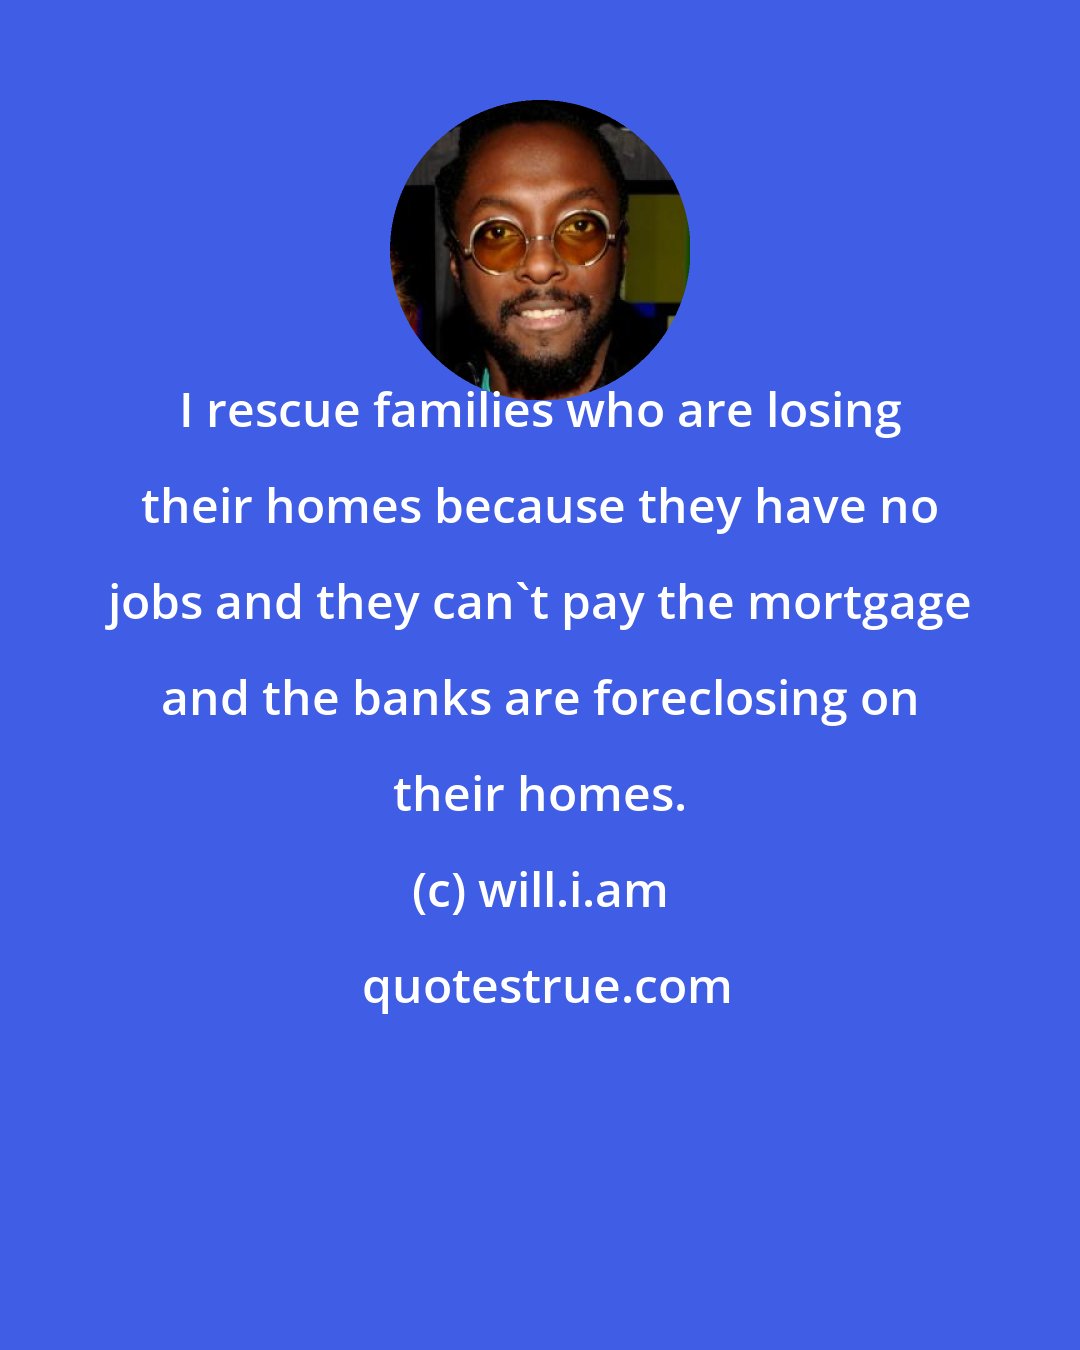 will.i.am: I rescue families who are losing their homes because they have no jobs and they can't pay the mortgage and the banks are foreclosing on their homes.